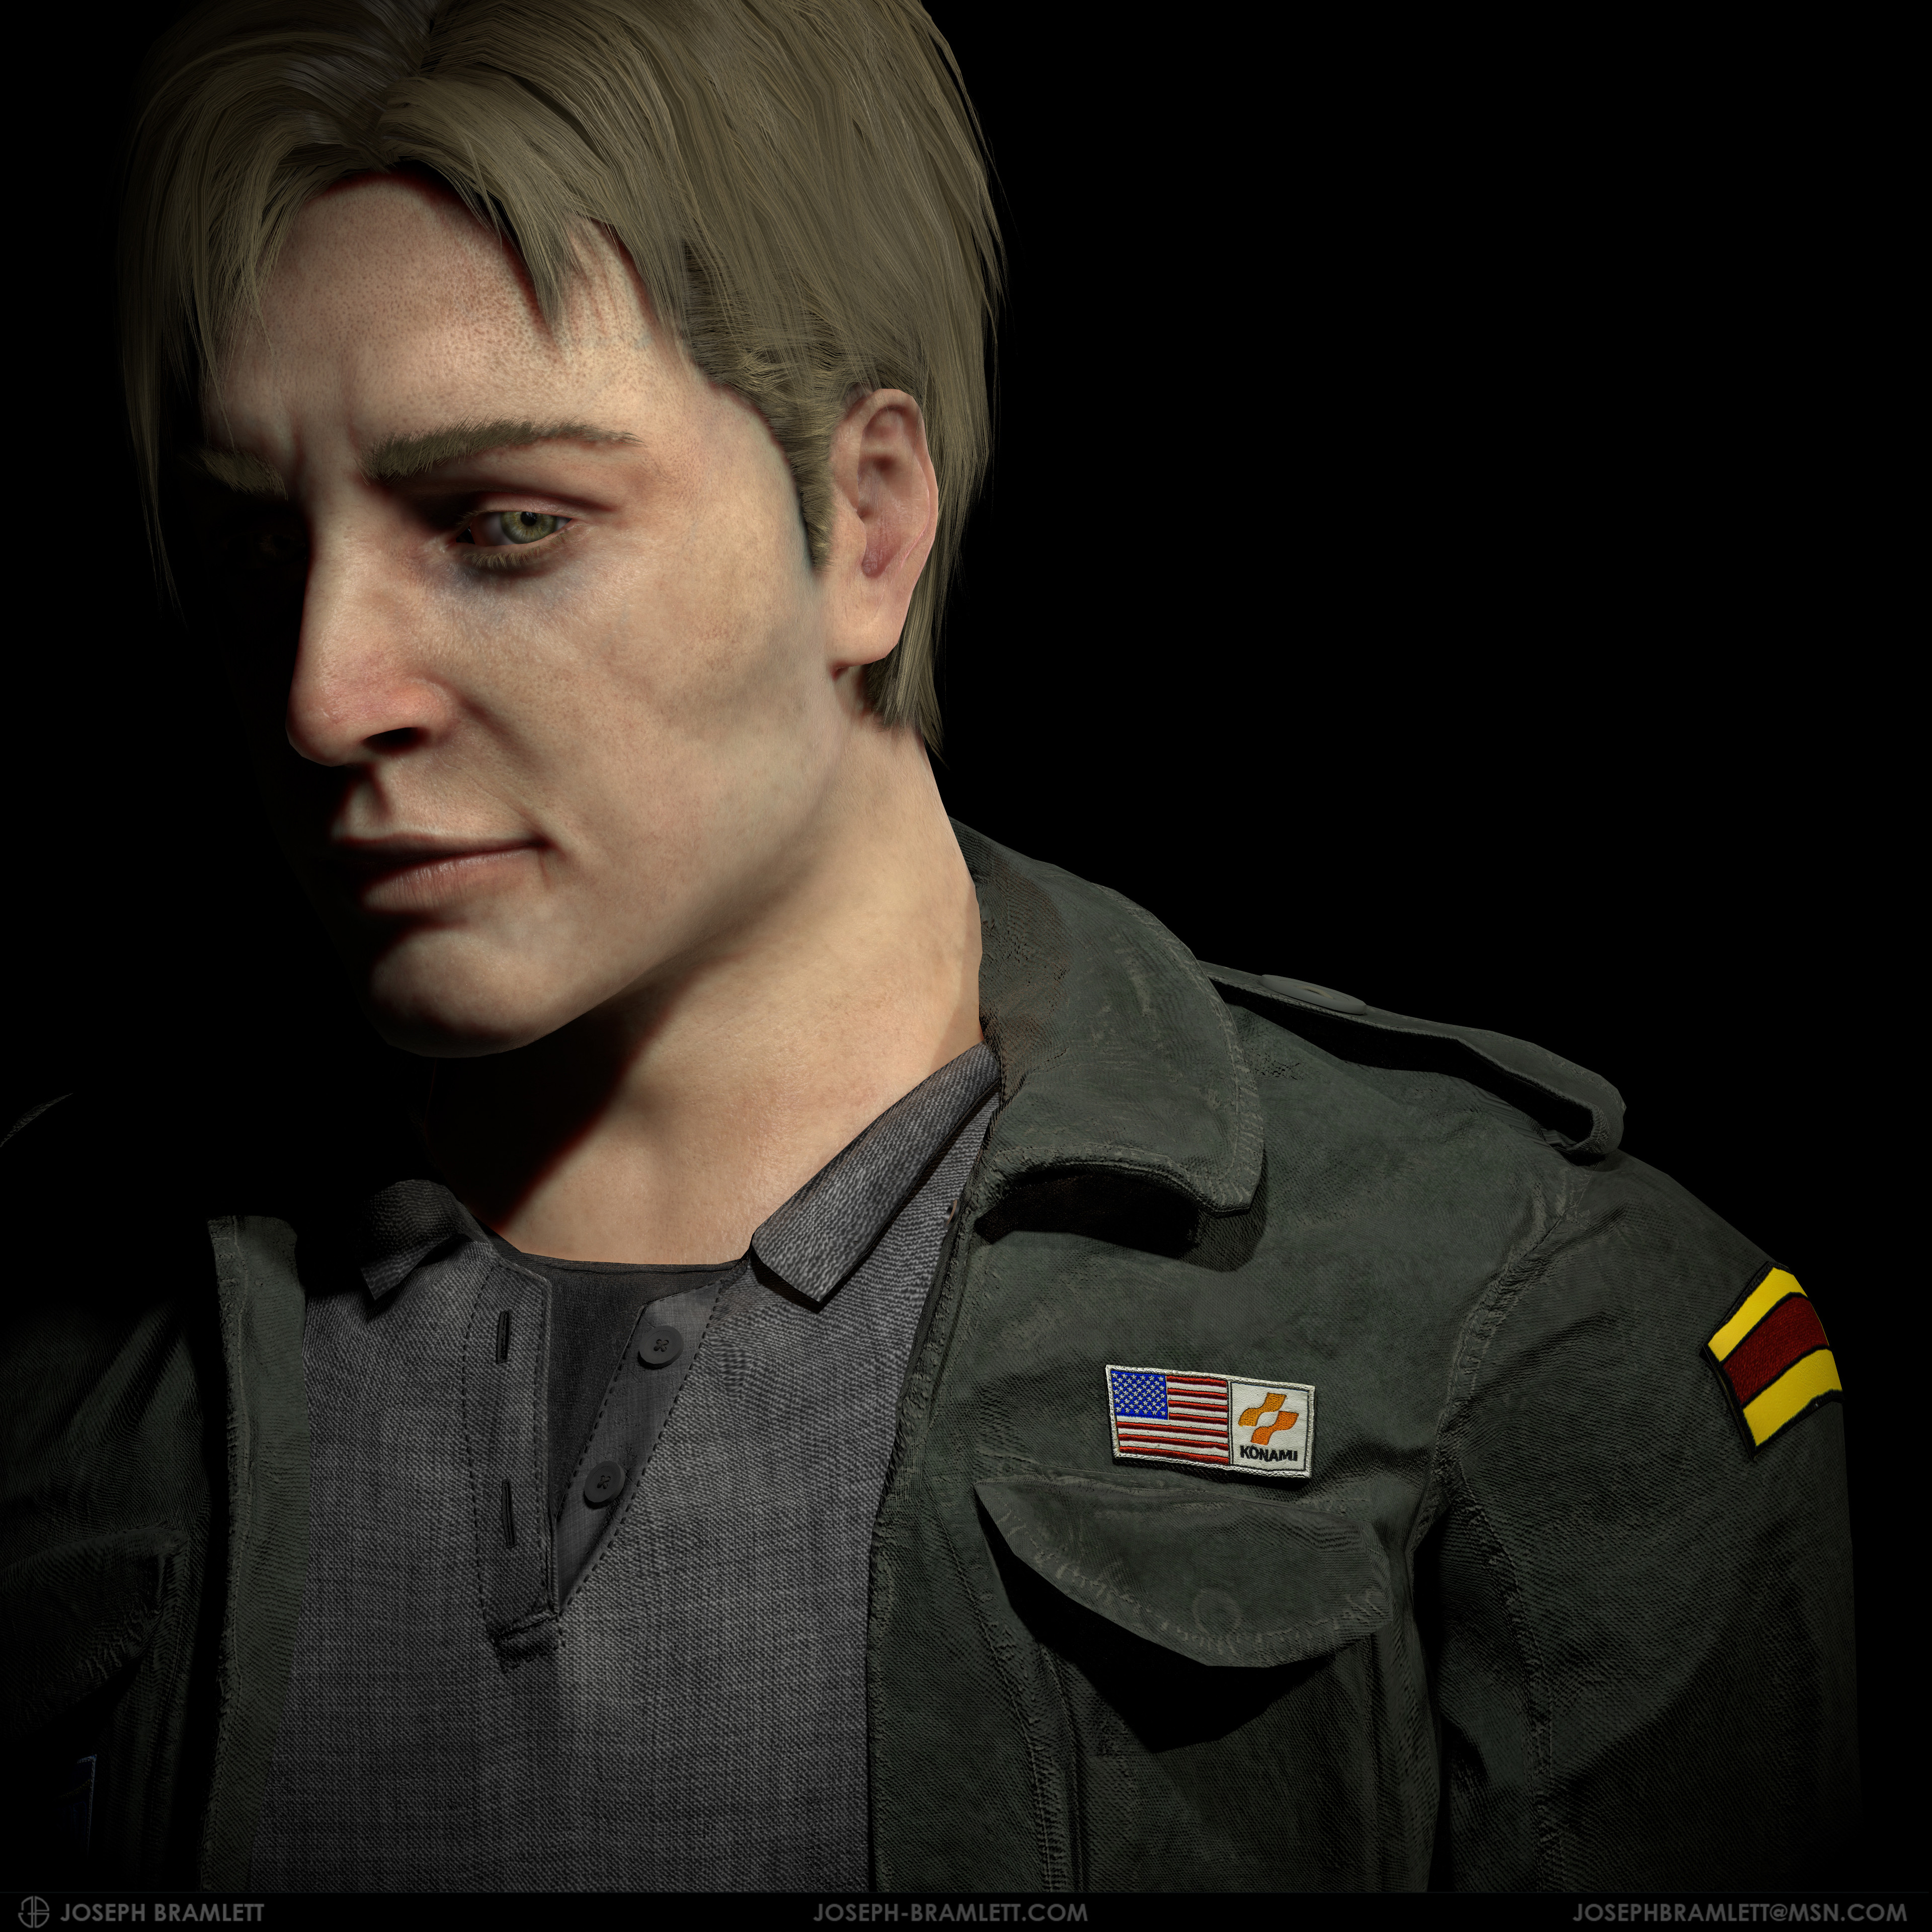 The Silent Hill 2 Remake Needs To Fix The 'Eddie' Problem